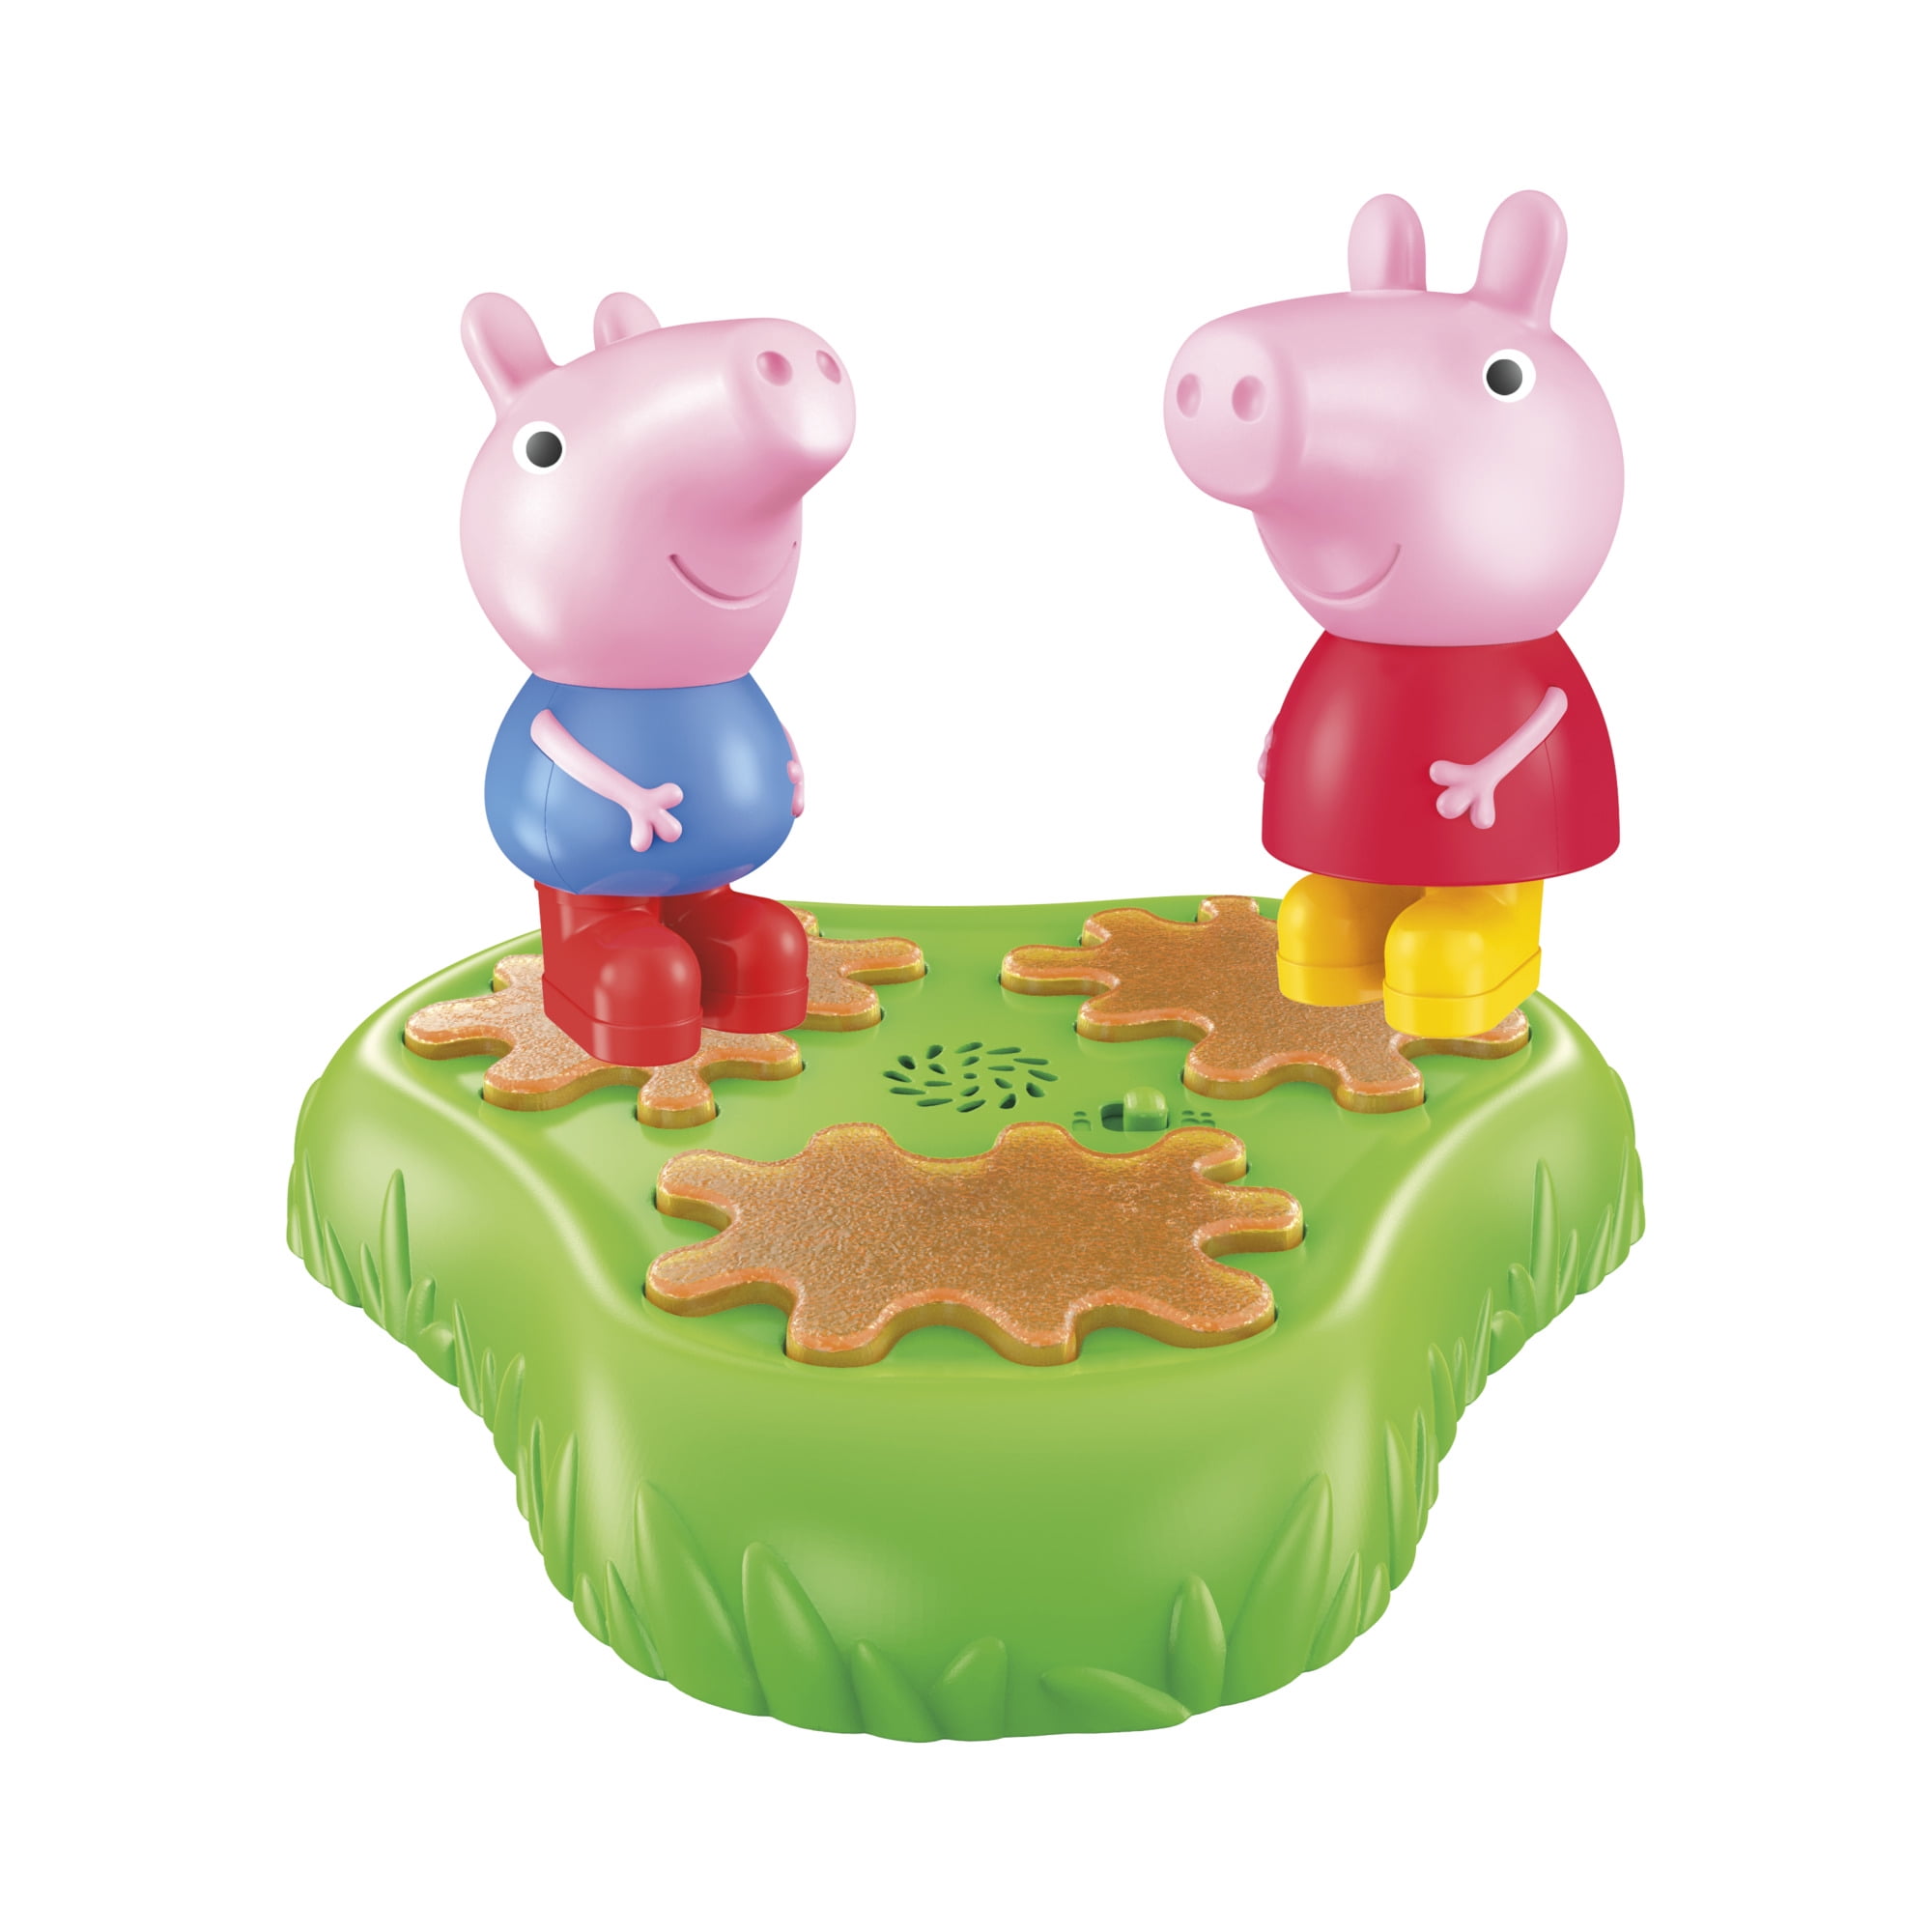 Peppa Pig Muddy Puddle Champion Board Game, Preschool Game for 1-2